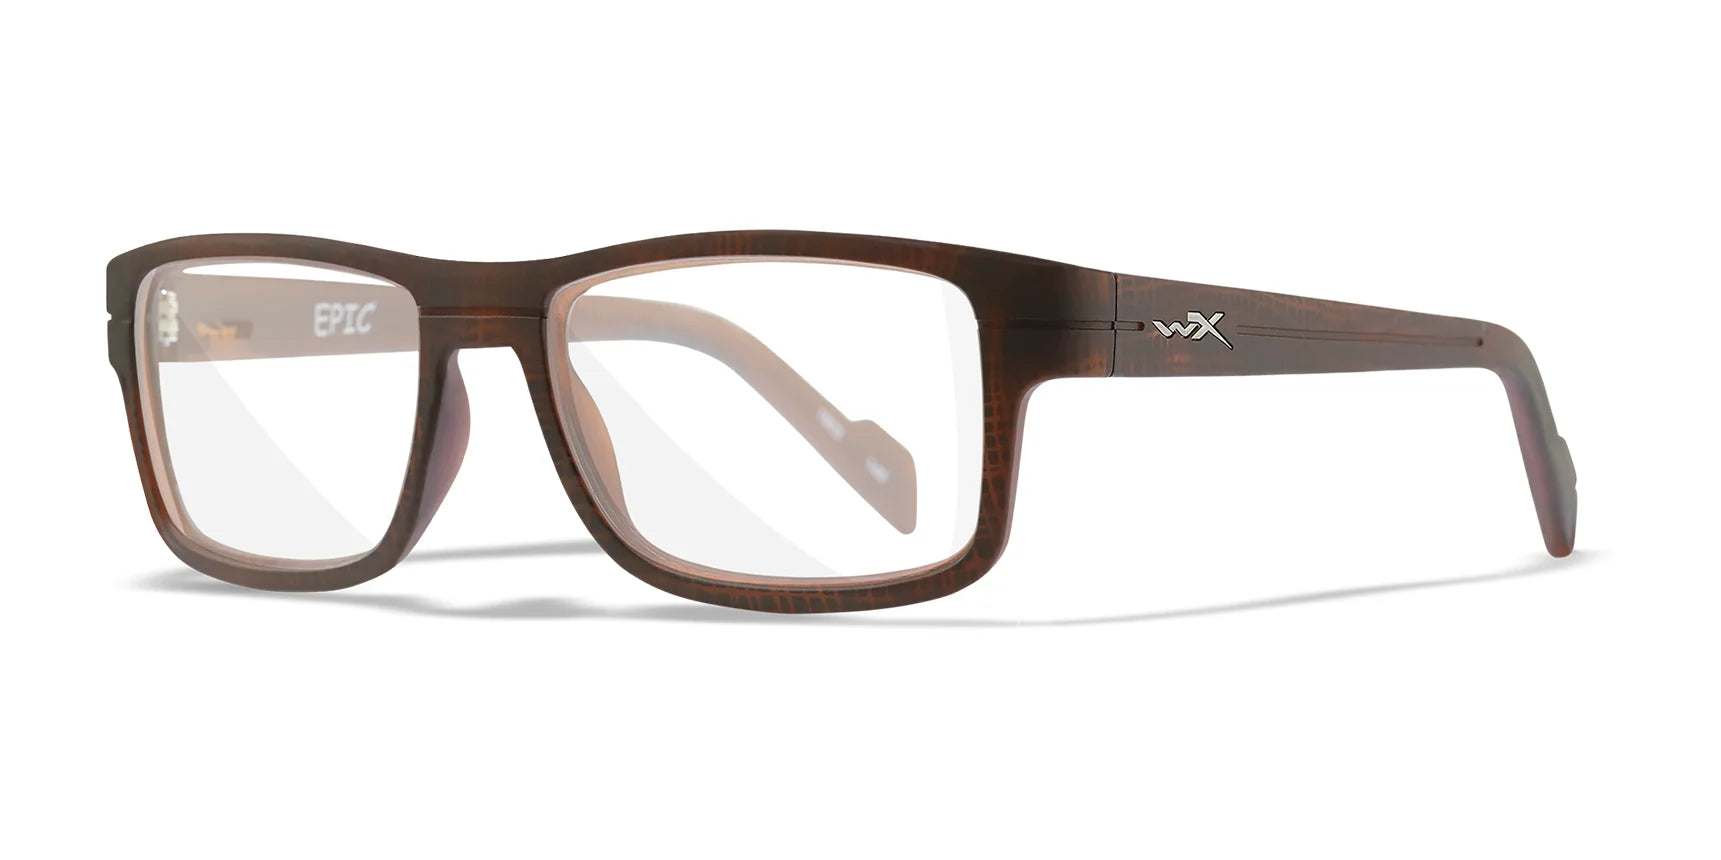 Wiley X EPIC Eyeglasses Matte Hickory Brown / Clear